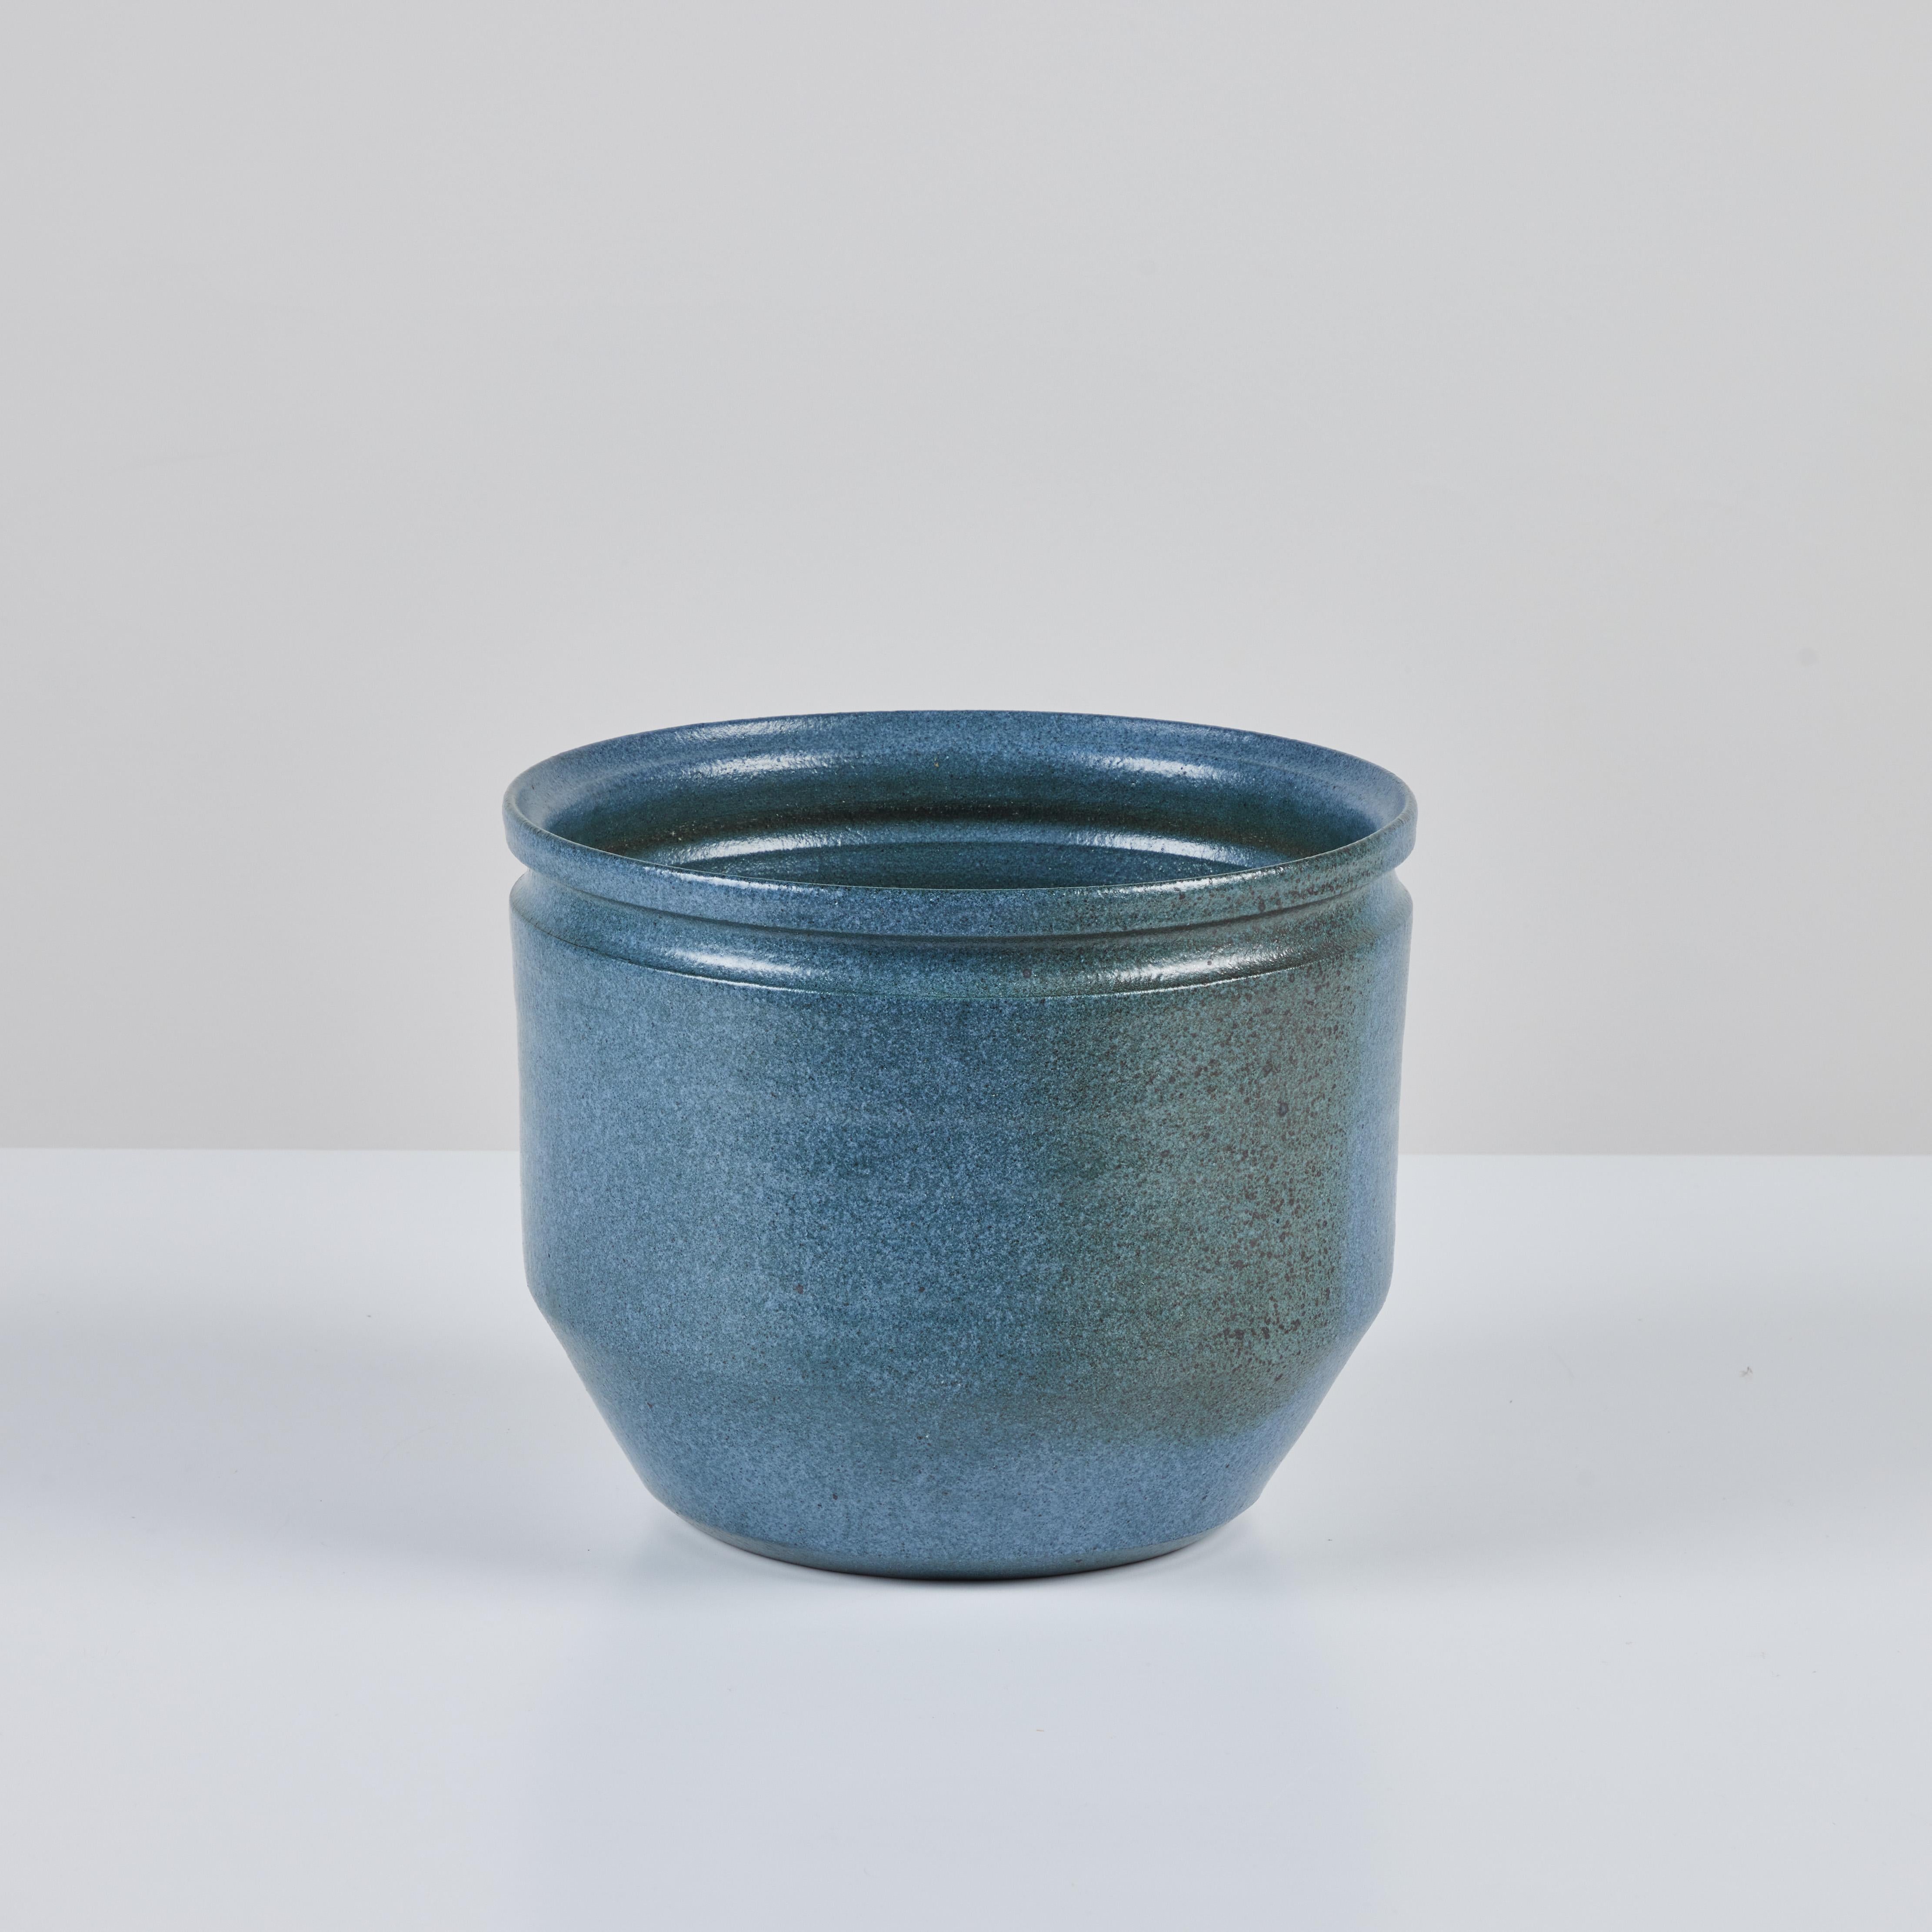 American David Cressey and Robert Maxwell Blue Speckle Glazed Planter for Earthgender